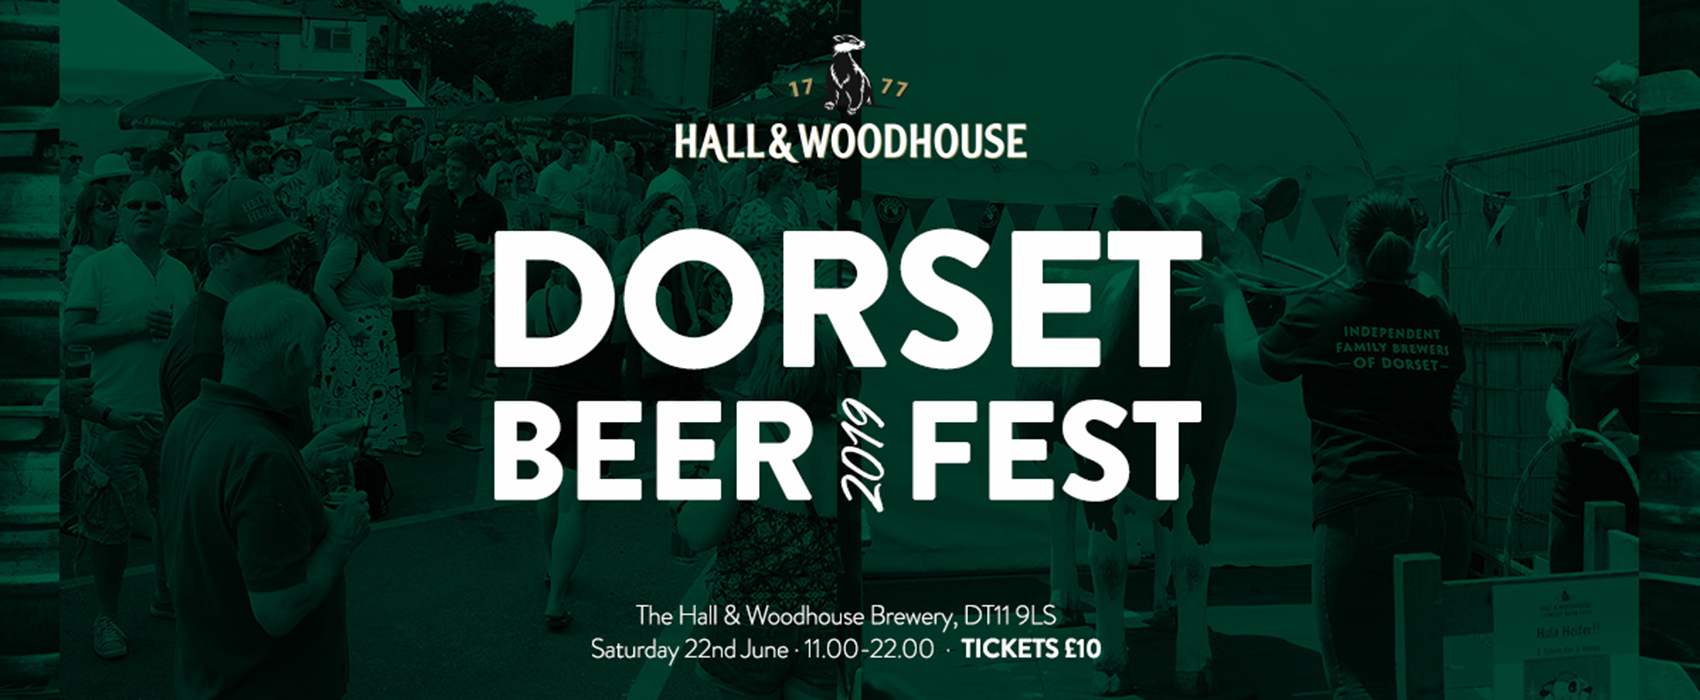 Dorset Beer Festival 2019 - Hall and Woodhouse